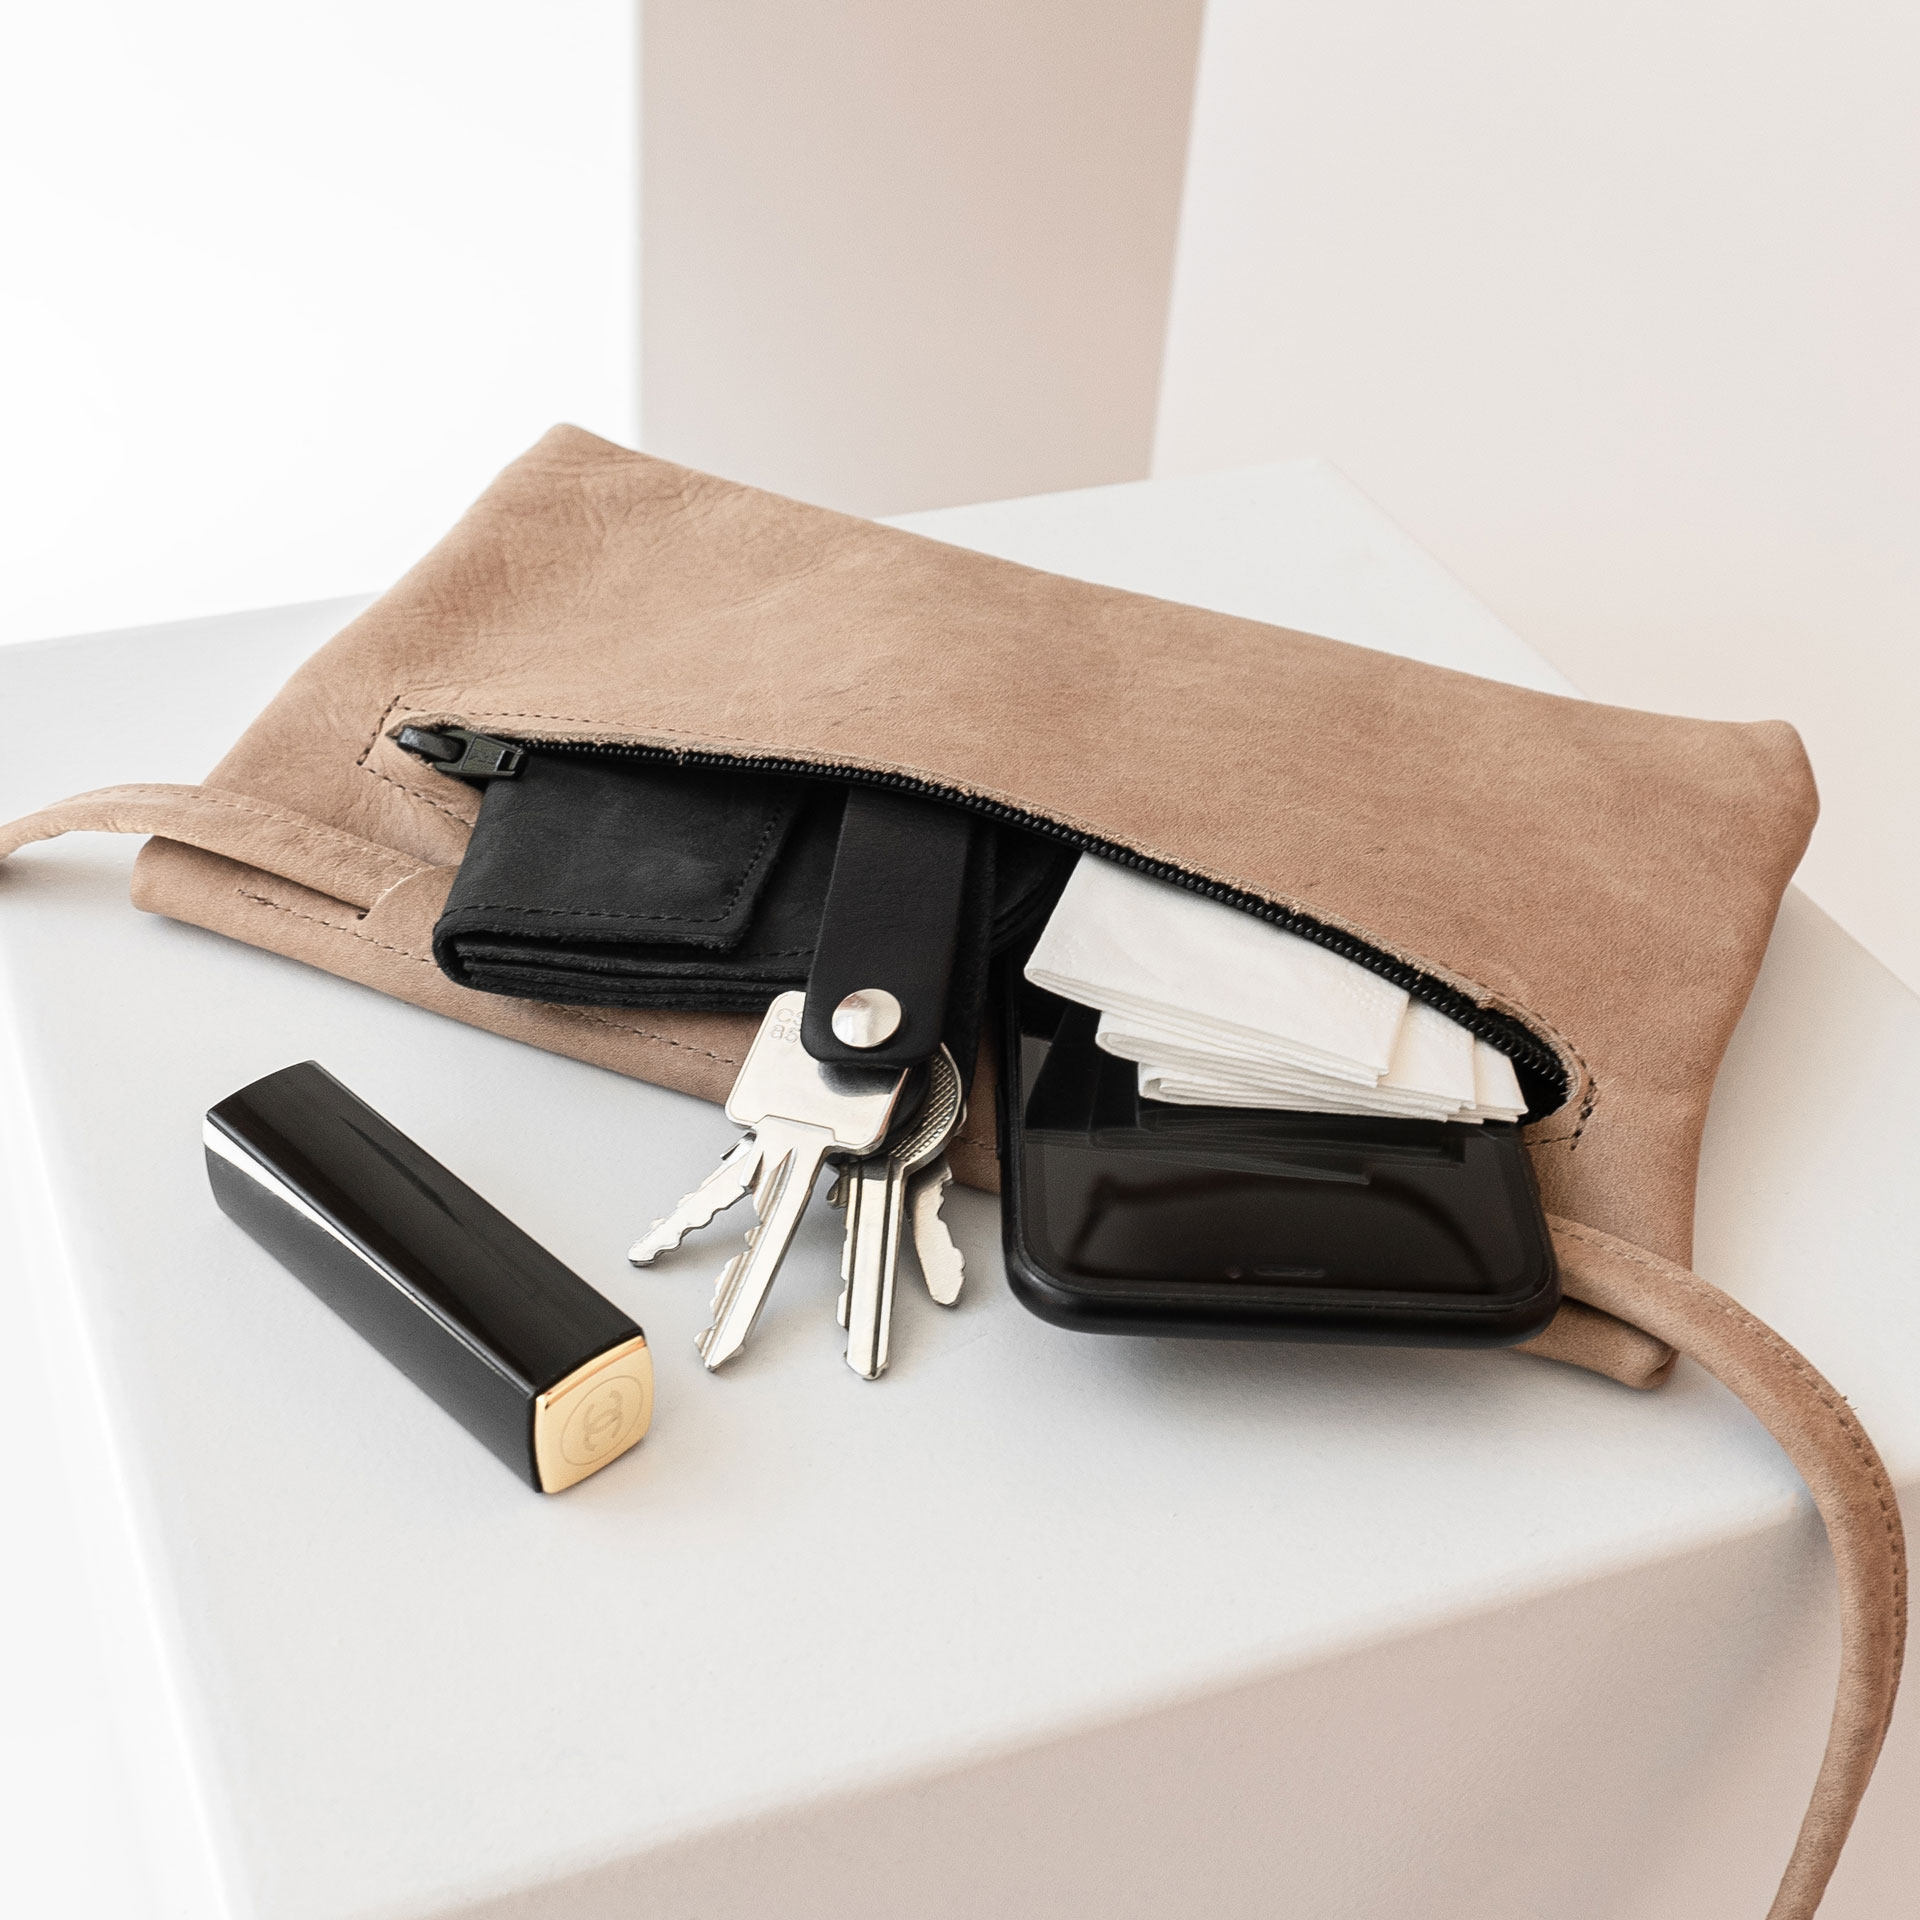 ISA takes your most important companions, such as smartphone, wallet and keys with you on your travels.